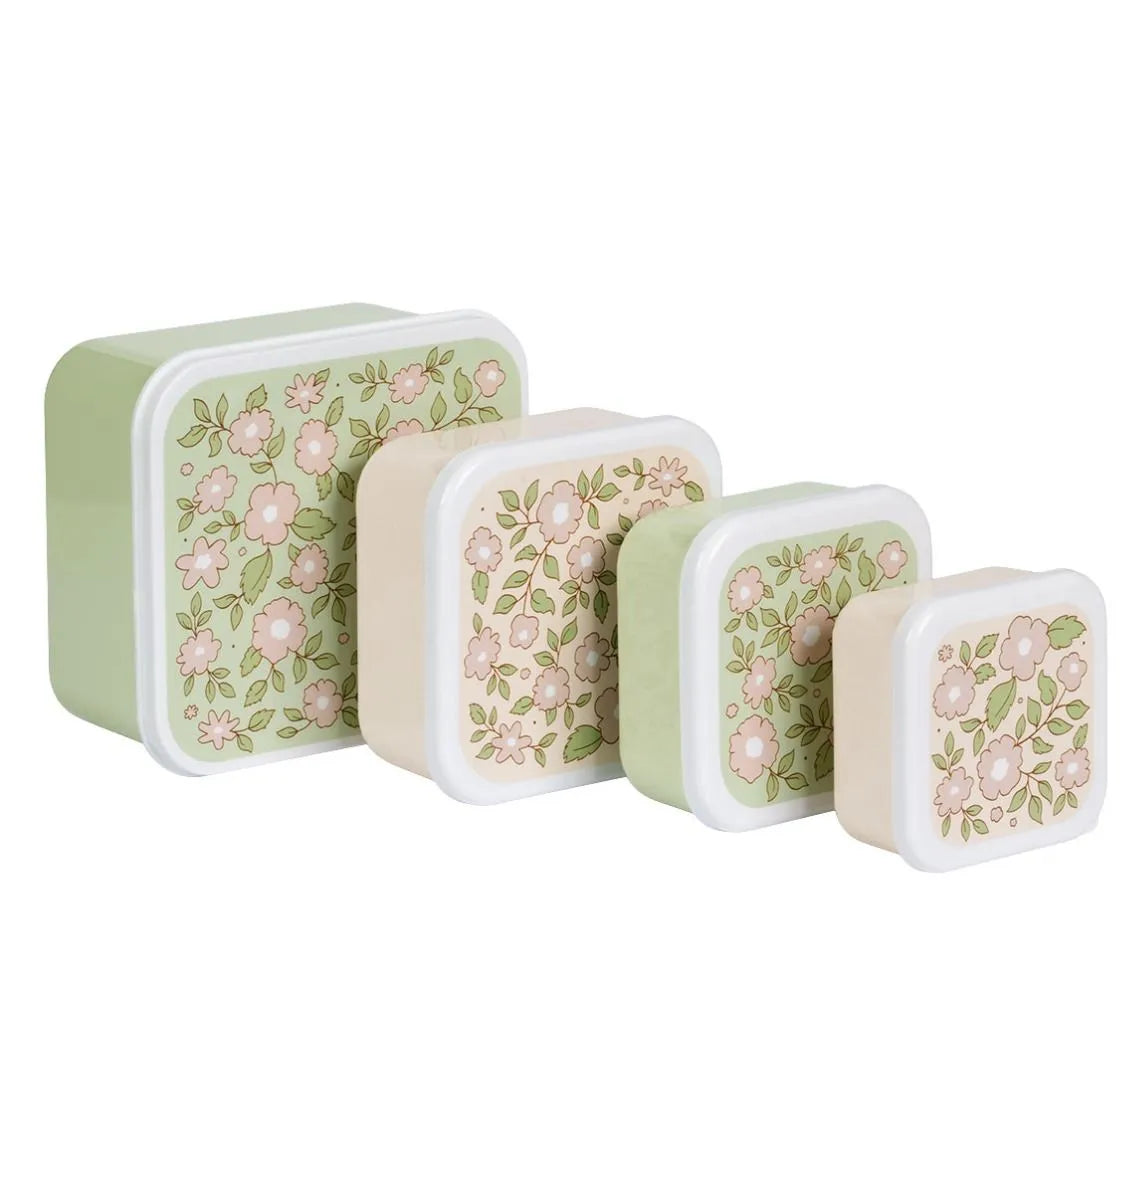 A LITTLE LOVELY COMPANY - Lunch & snack box set - Blossoms